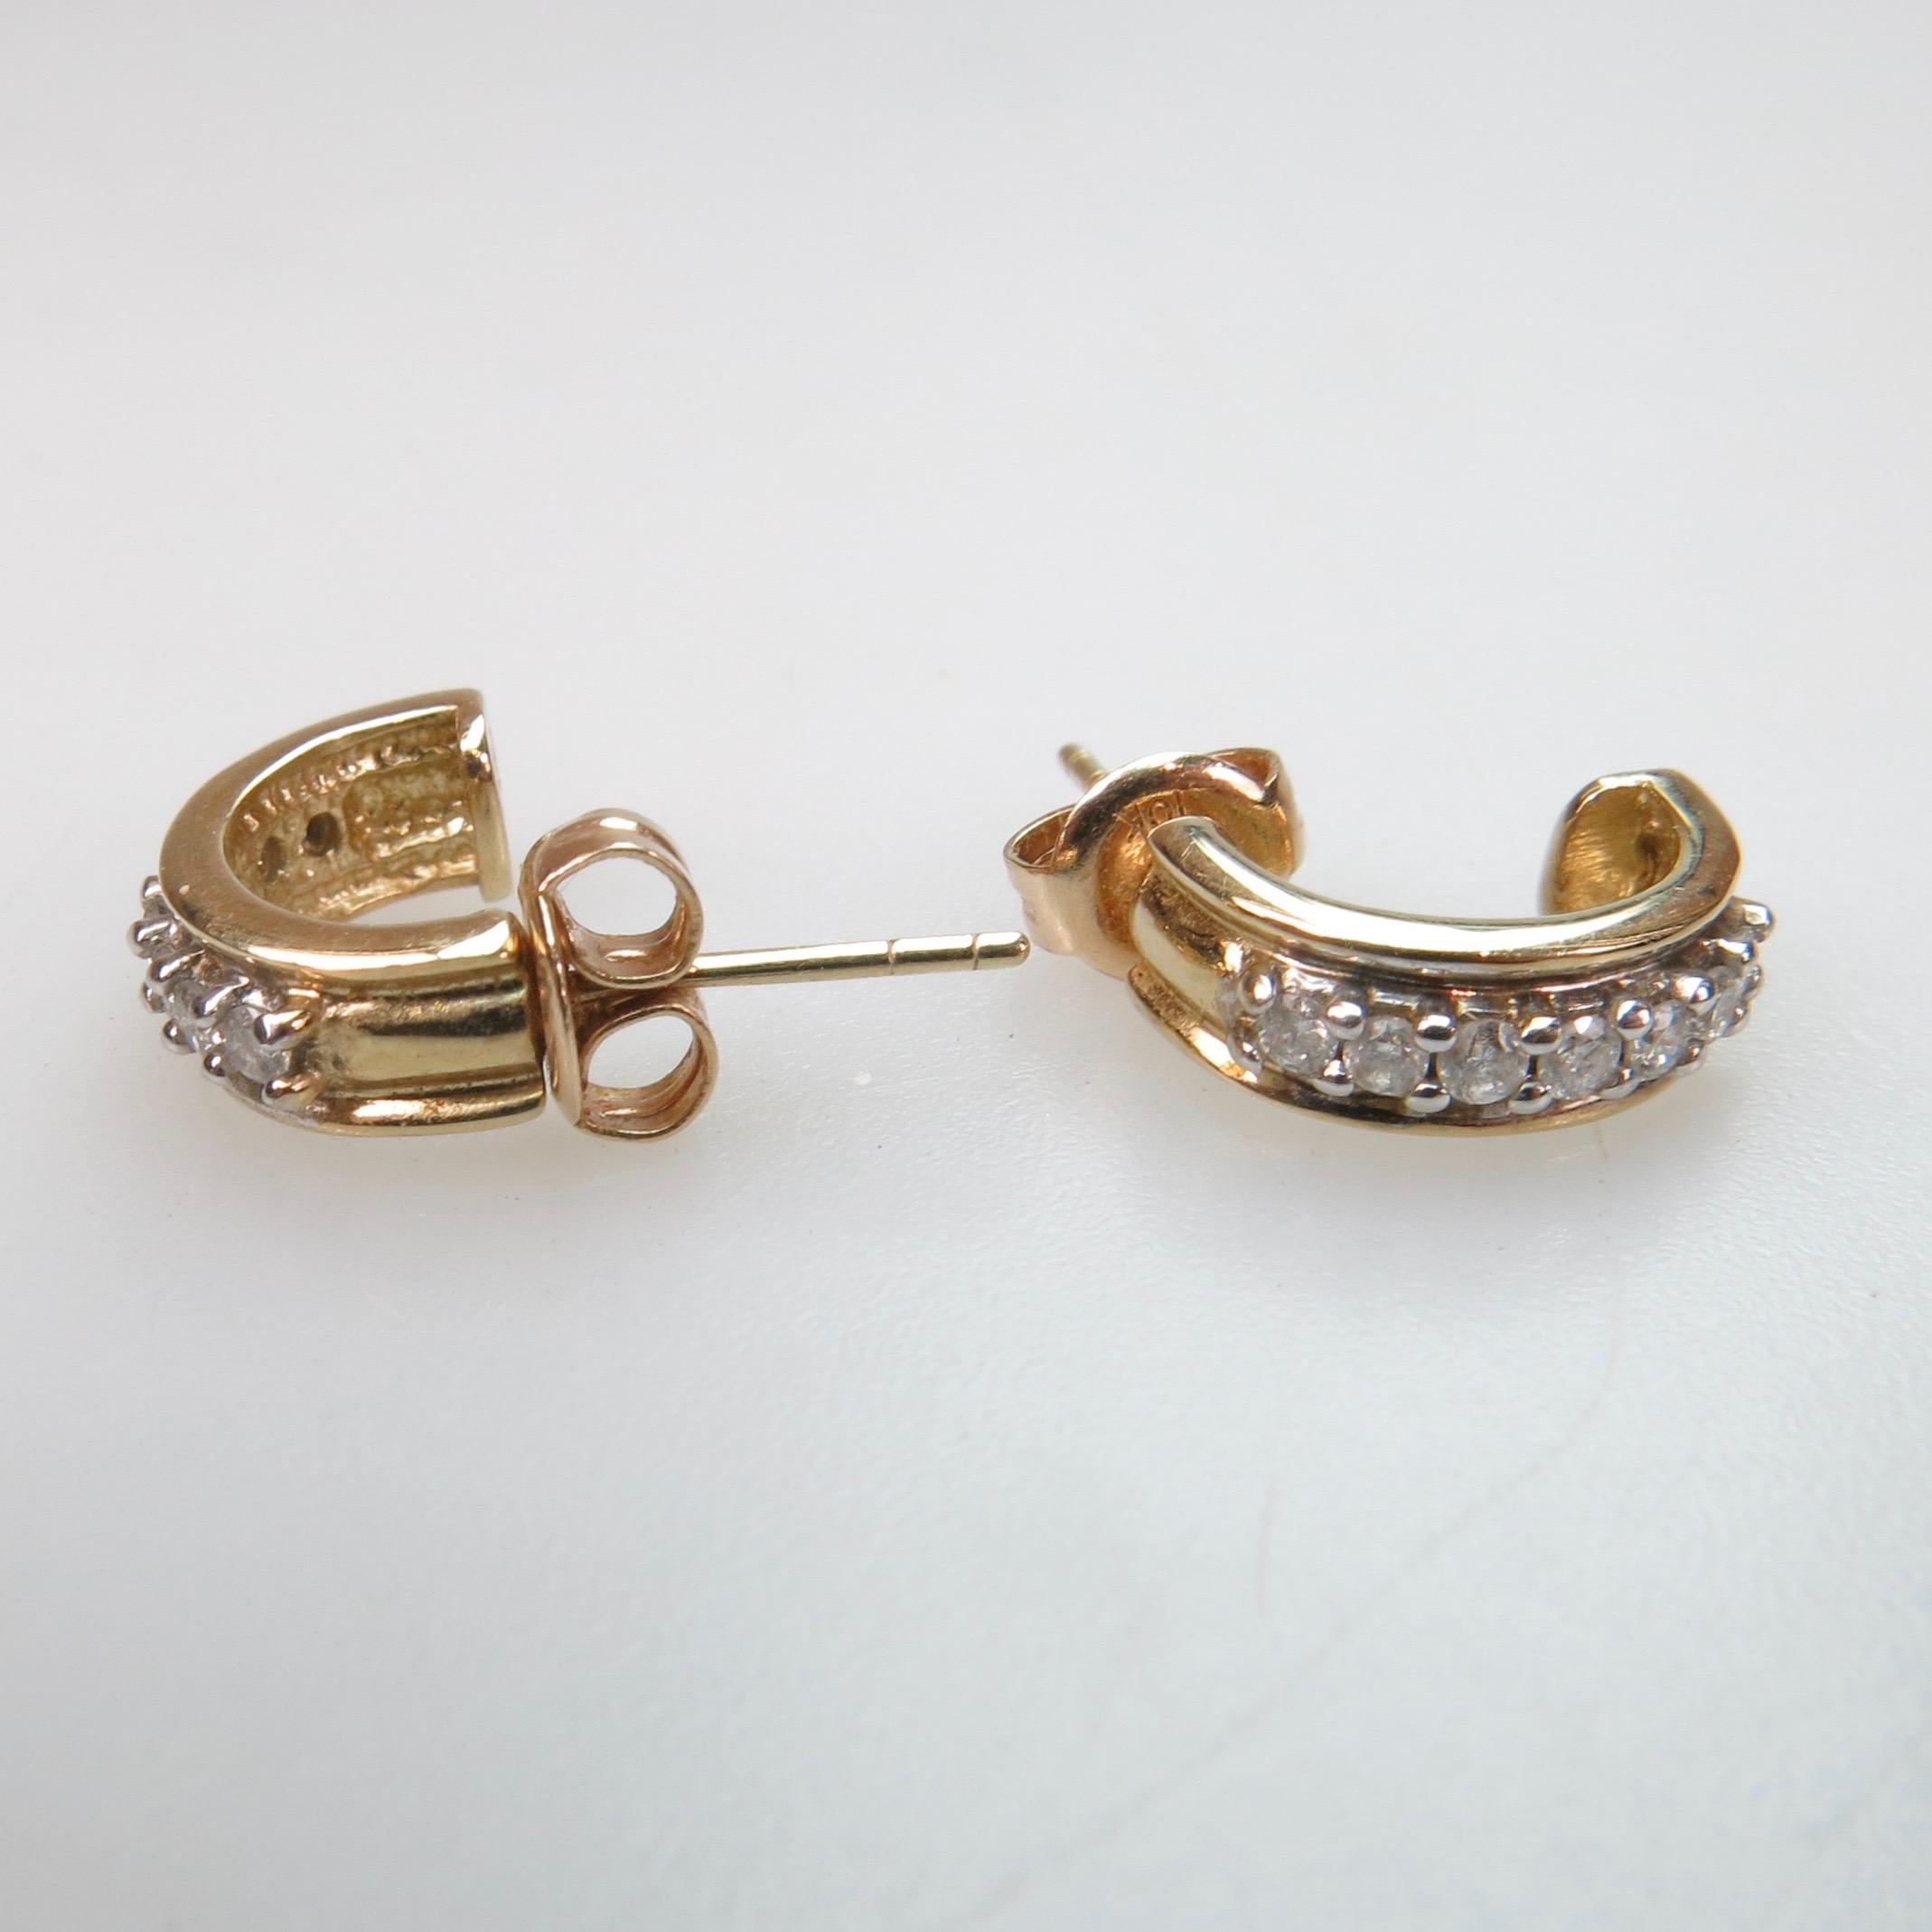 Small Quantity Of 14k And 10k Yellow Gold Jewellery